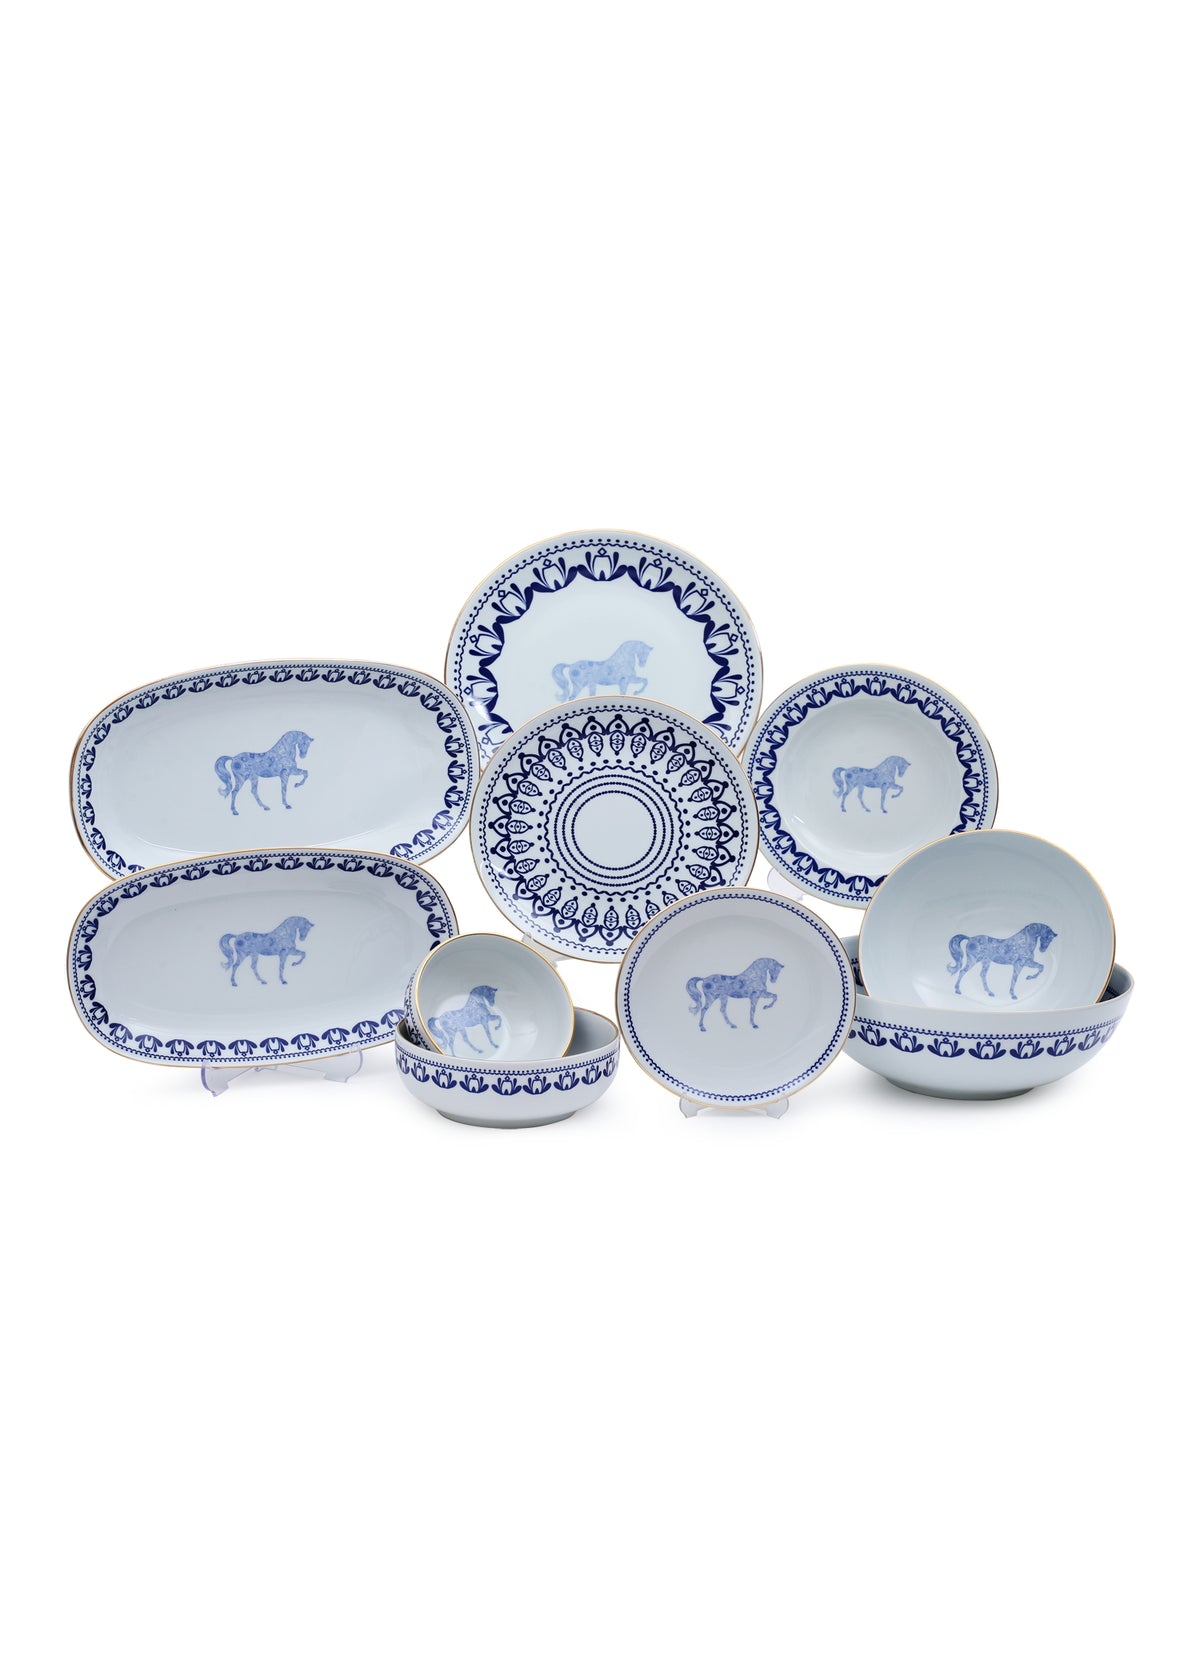 Horse Luck Collection-Blue Set of 6 Plates (46 pieces)